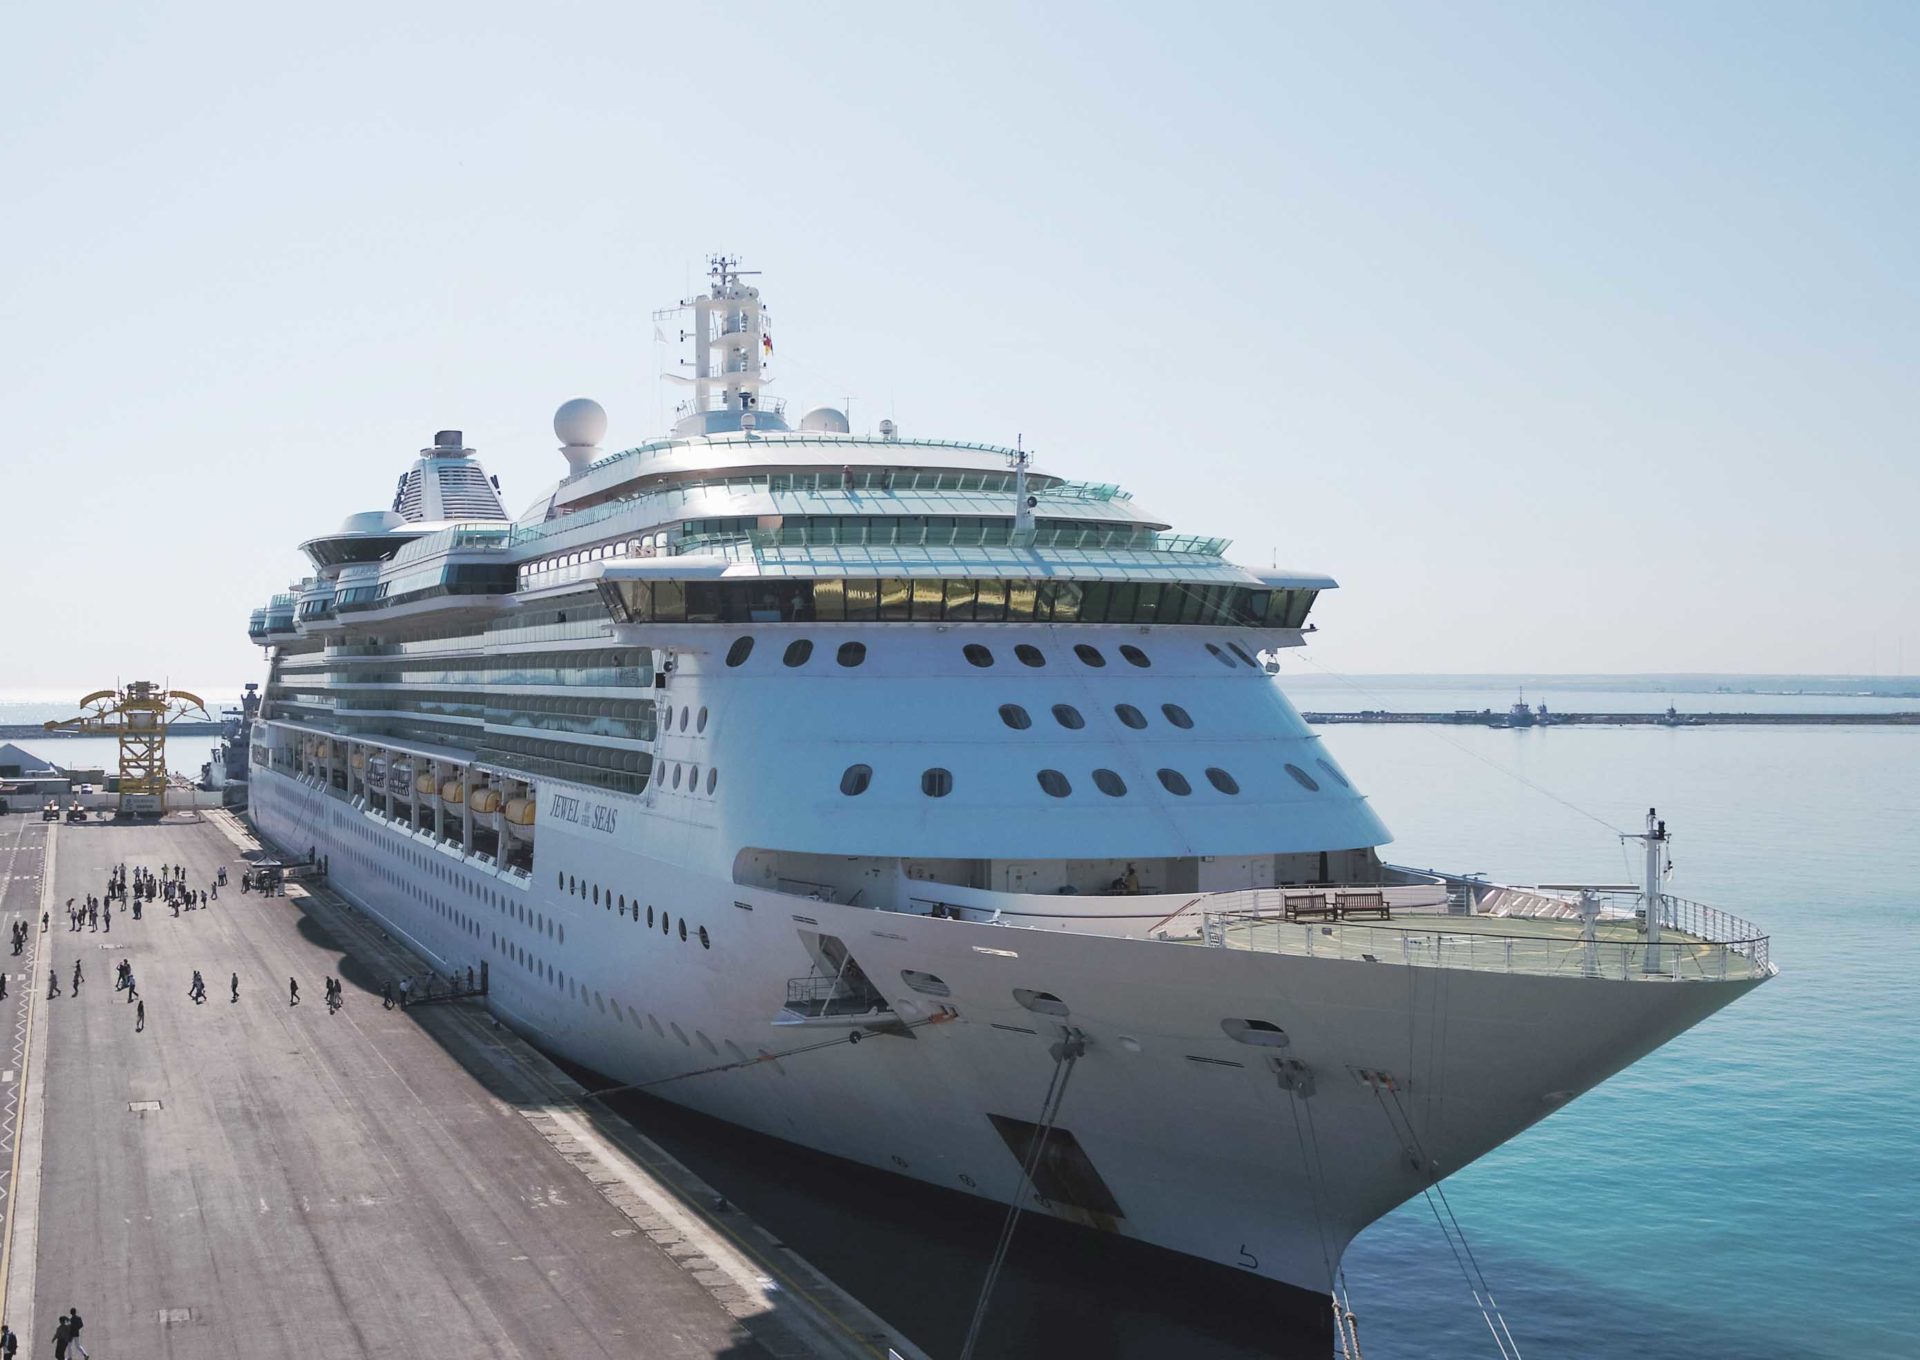 Royal Caribbean 7-night cruises ‘for the fully vaccinated’ launching from Limassol this summer